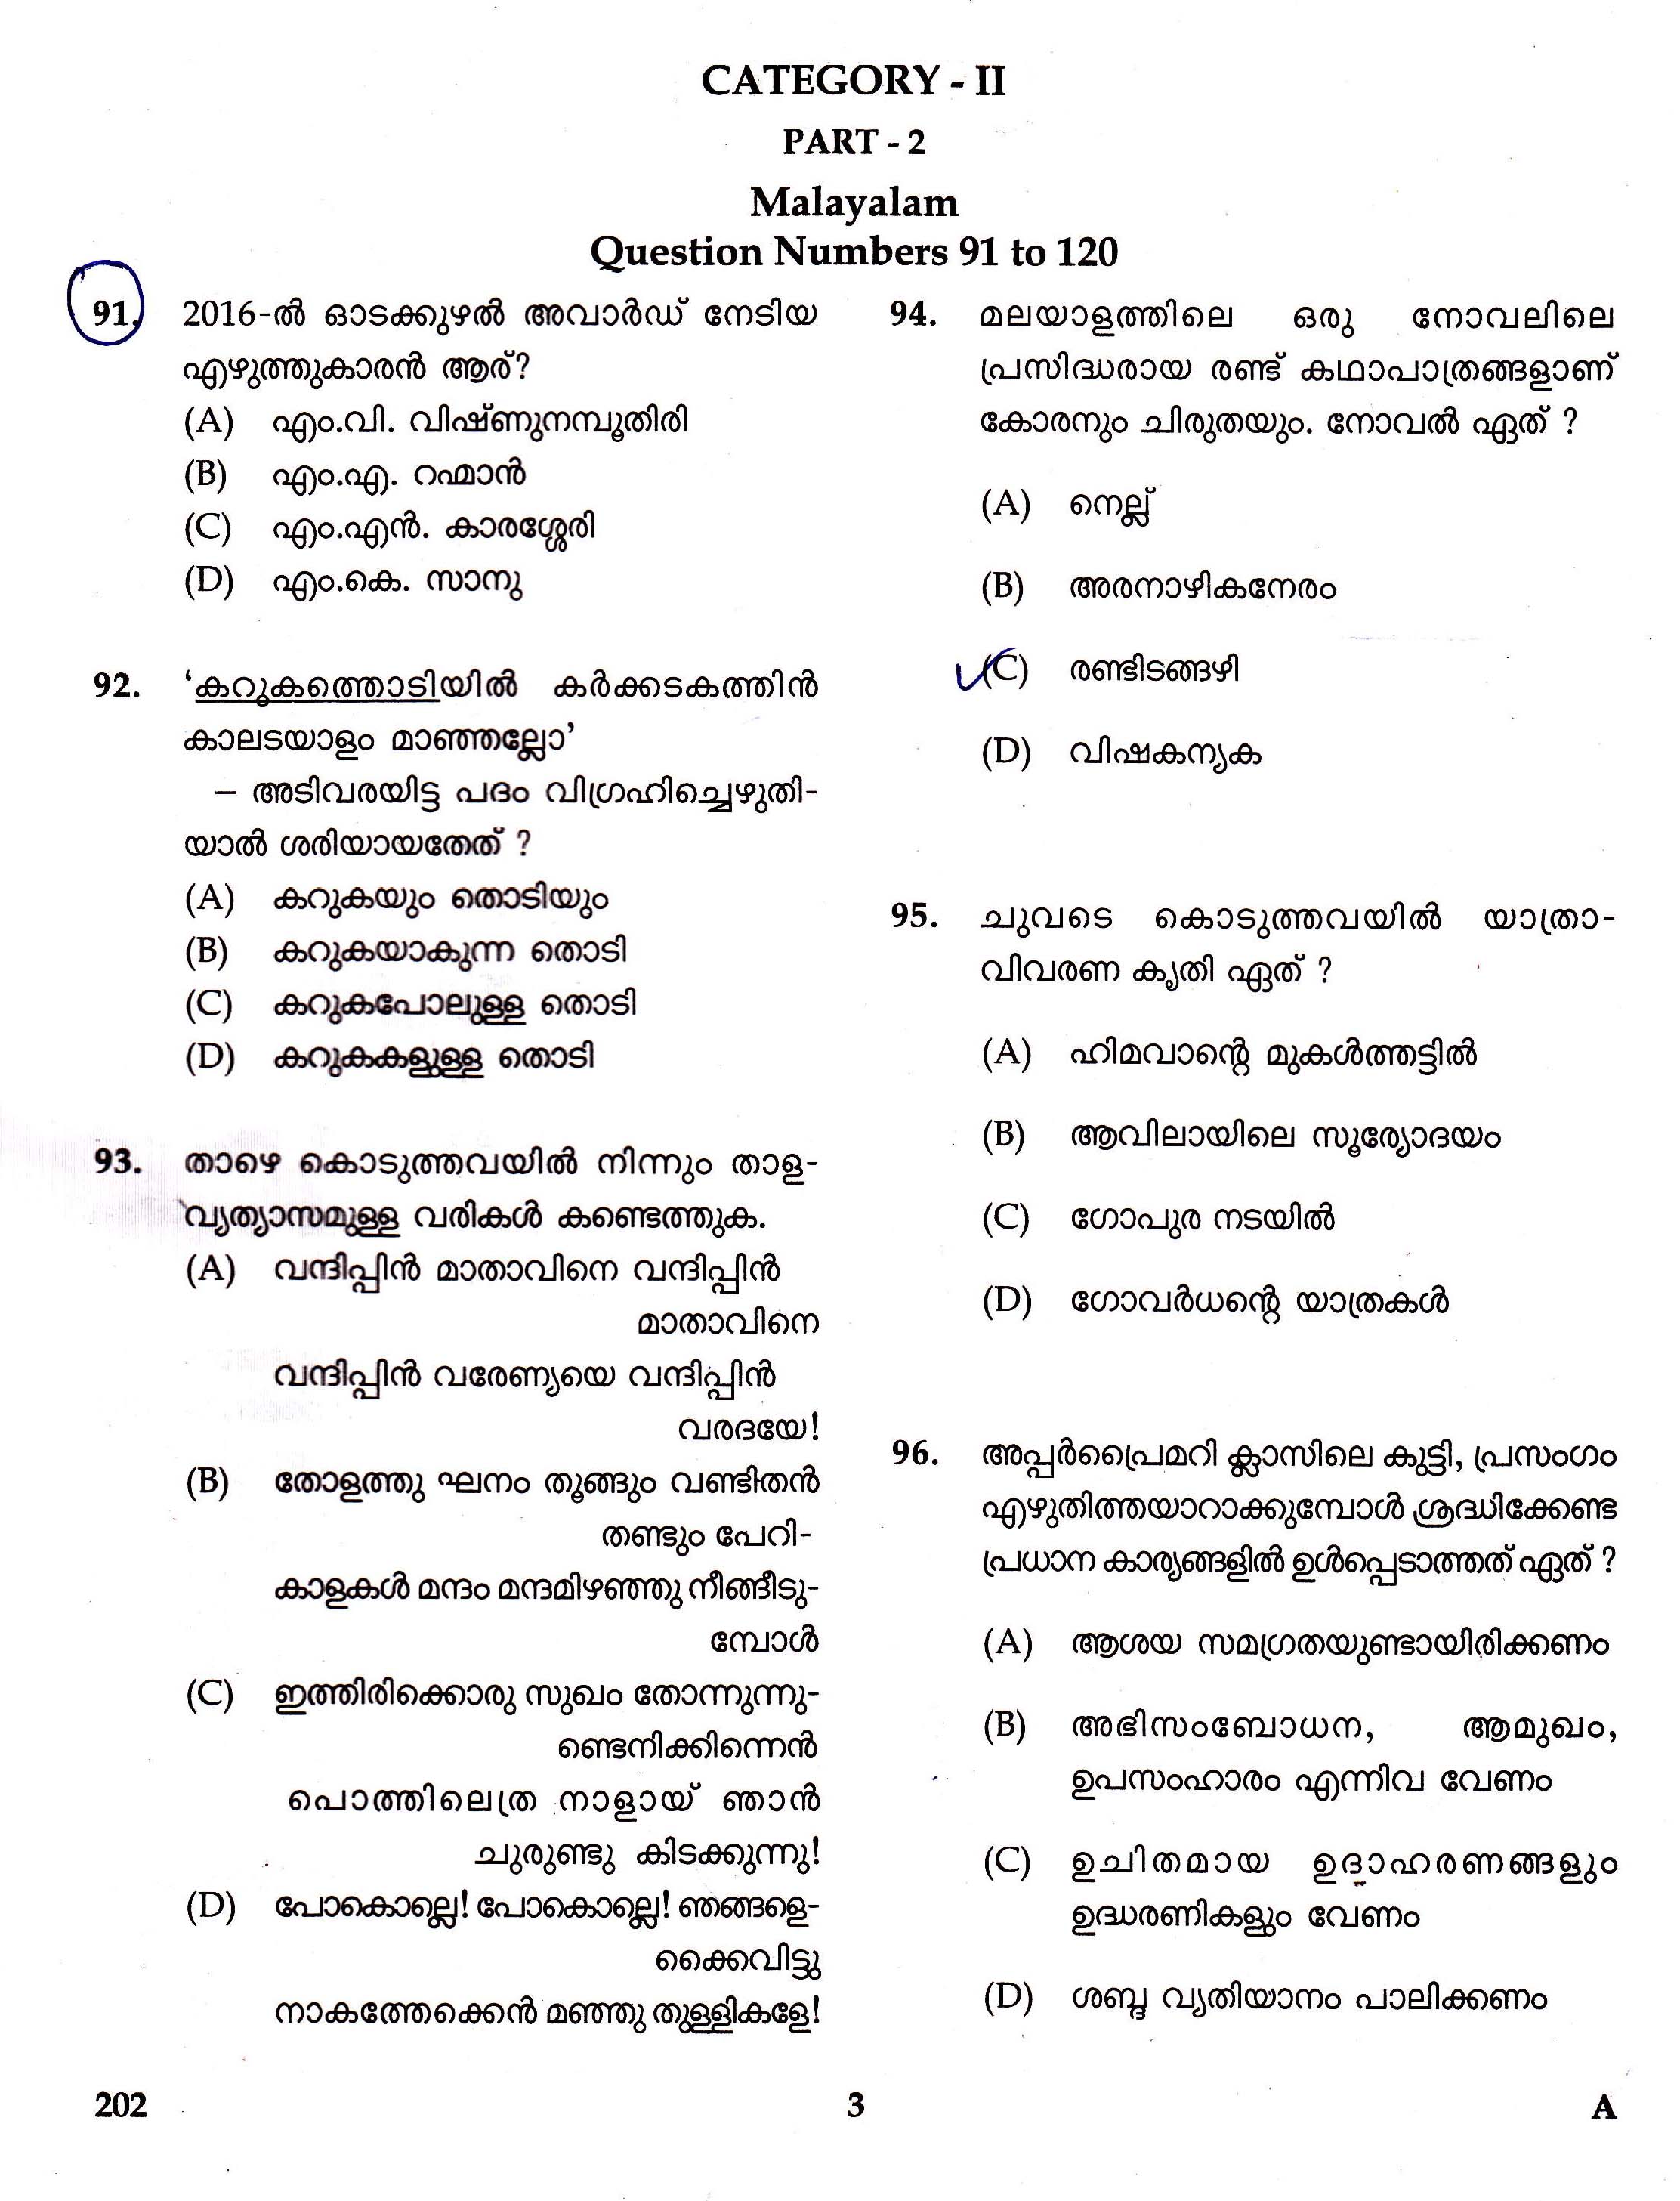 KTET Category II Part 2 Malayalam Question Paper with Answers August 2017 1